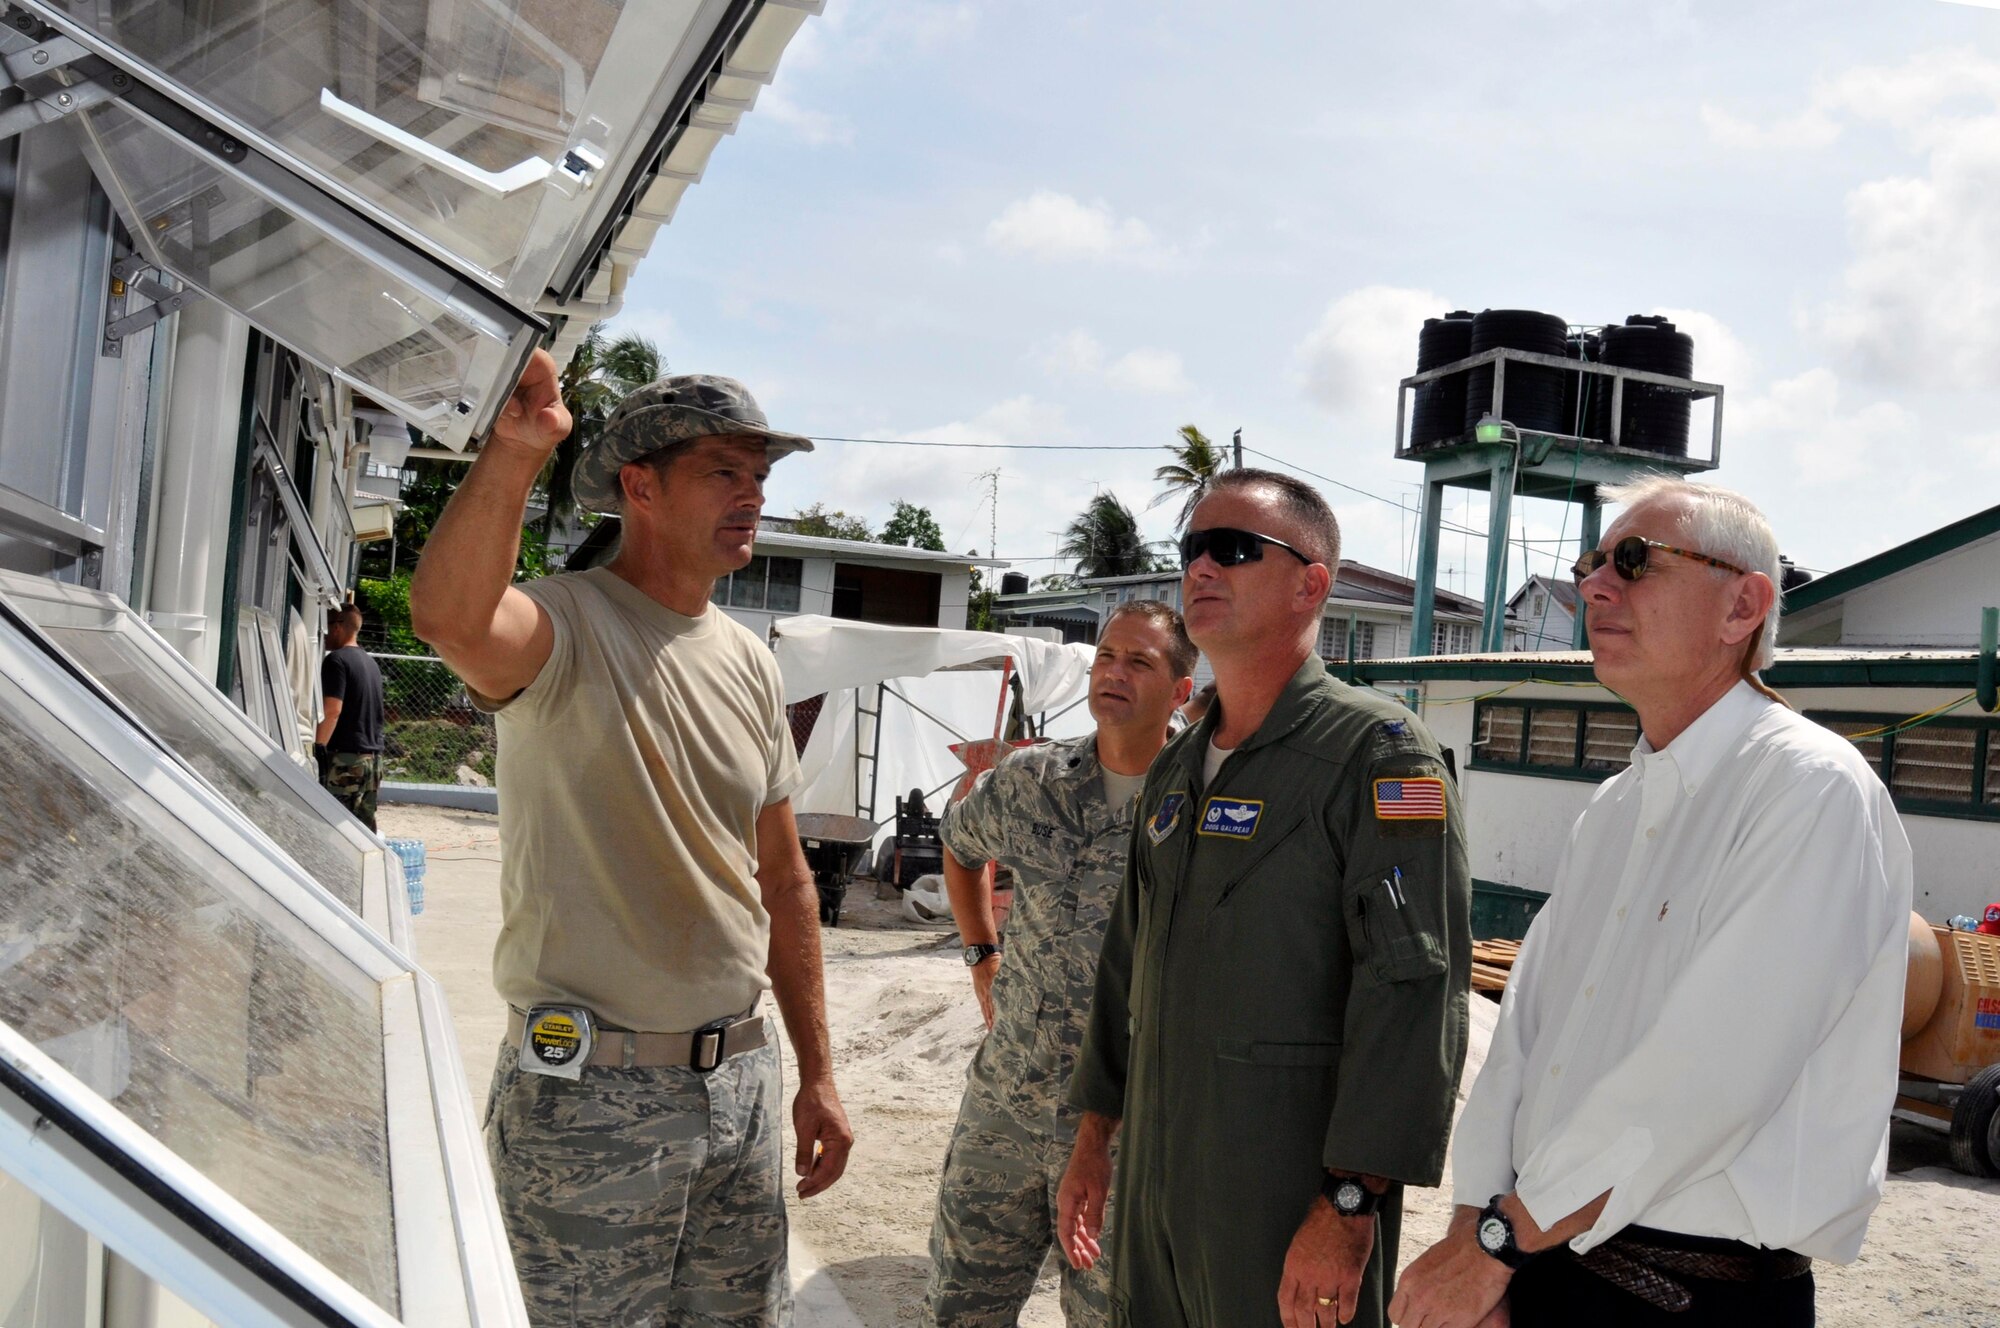 Chief Master Sgt. Steve Milhollin, chief engineer for the Bel Air School site, briefs Lt. Col. John Buse, Chief of Engineering for New Horizons Guyana, Col. Douglas Galipeau, 474th Air Expeditionary Group Commander, and Mr. Ken Popelas, 474th Air Expeditionary Group Deputy Commander, on the benefits of using the type of windows on the school, Aug 20, 2009, at the Bel Air School, Georgetown, Guyana. Col. Galipeau visited two Medical Readiness and Training Exercises, one Dental Readiness and Training Exercise, an orphanage, and two construction projects all part of New Horizons Guyana. (U.S. Air Force photo by Airman 1st Class Perry Aston) (Released)